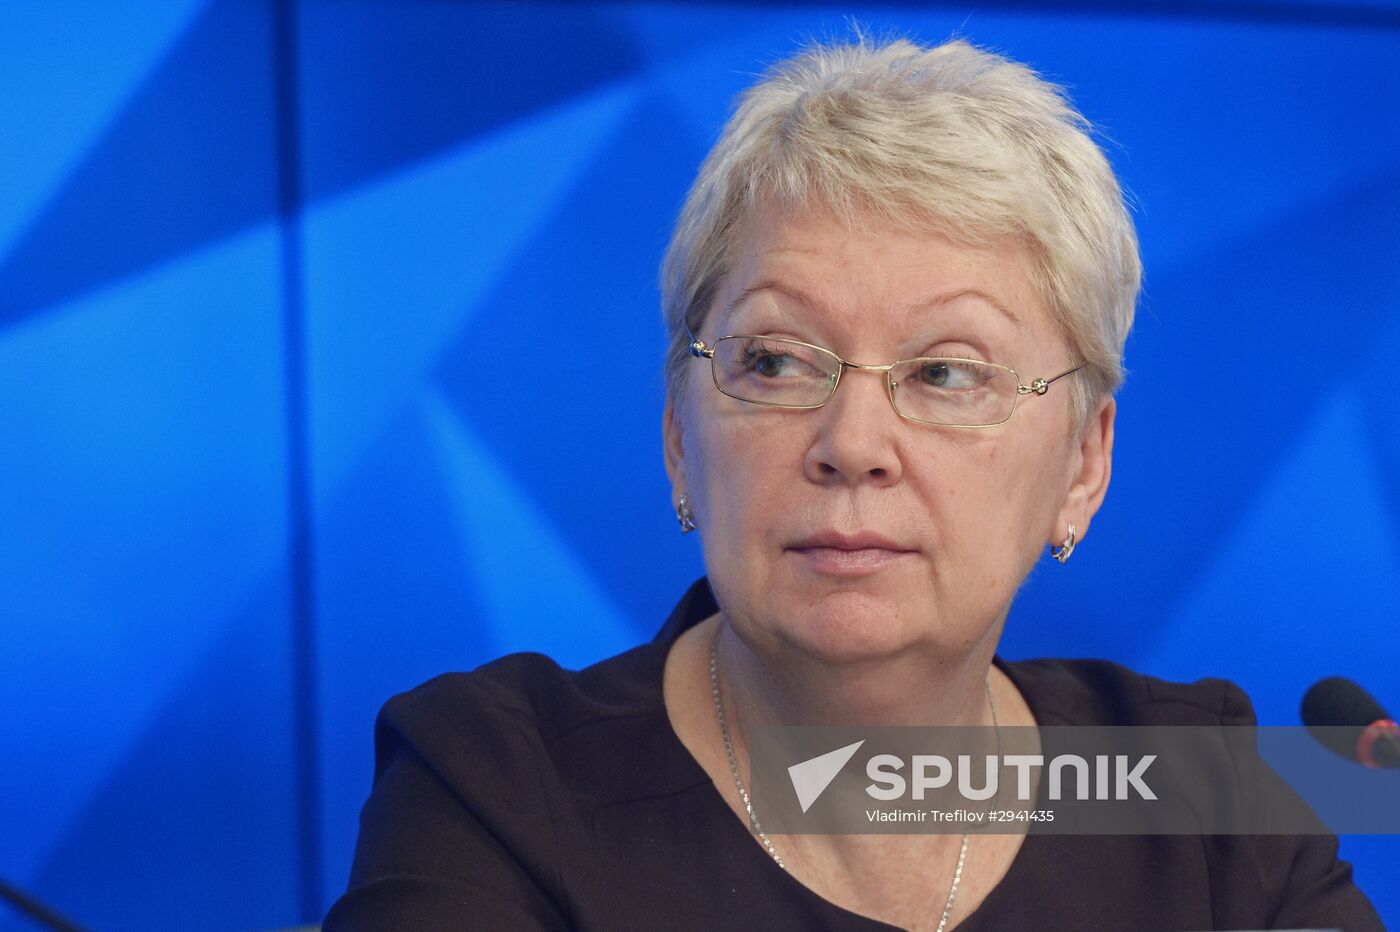 News conference by Minister of Education and Science Olga Vasilyeva